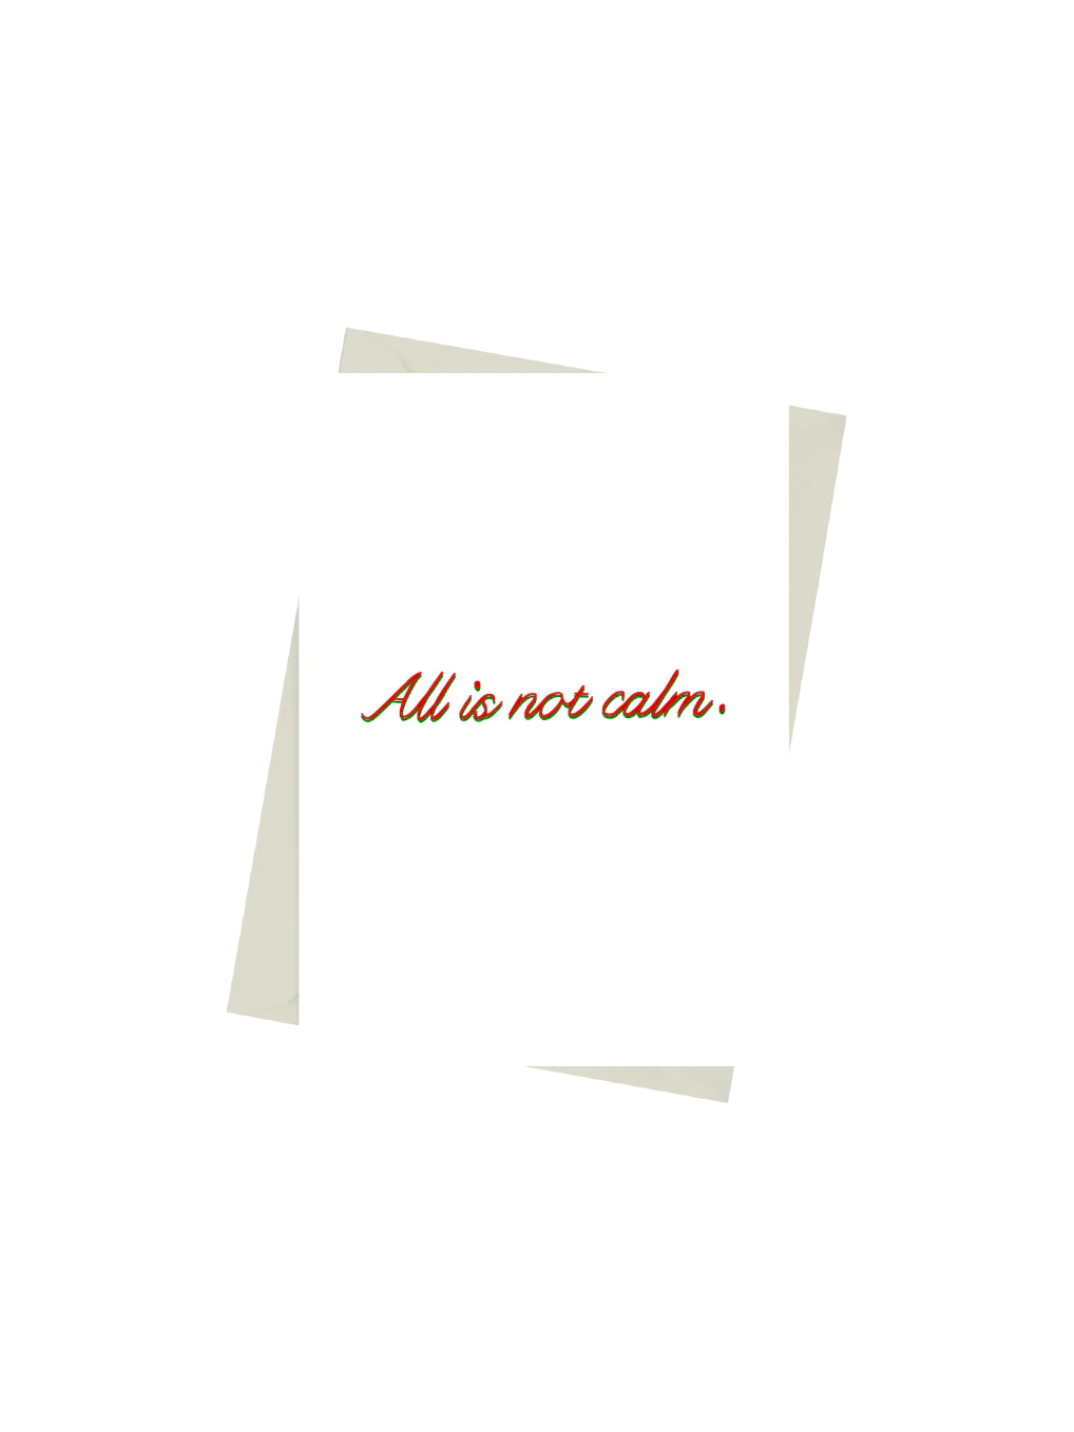 all is not calm funny humorous greeting card Christmas card recycled paper shop eco-friendly gift